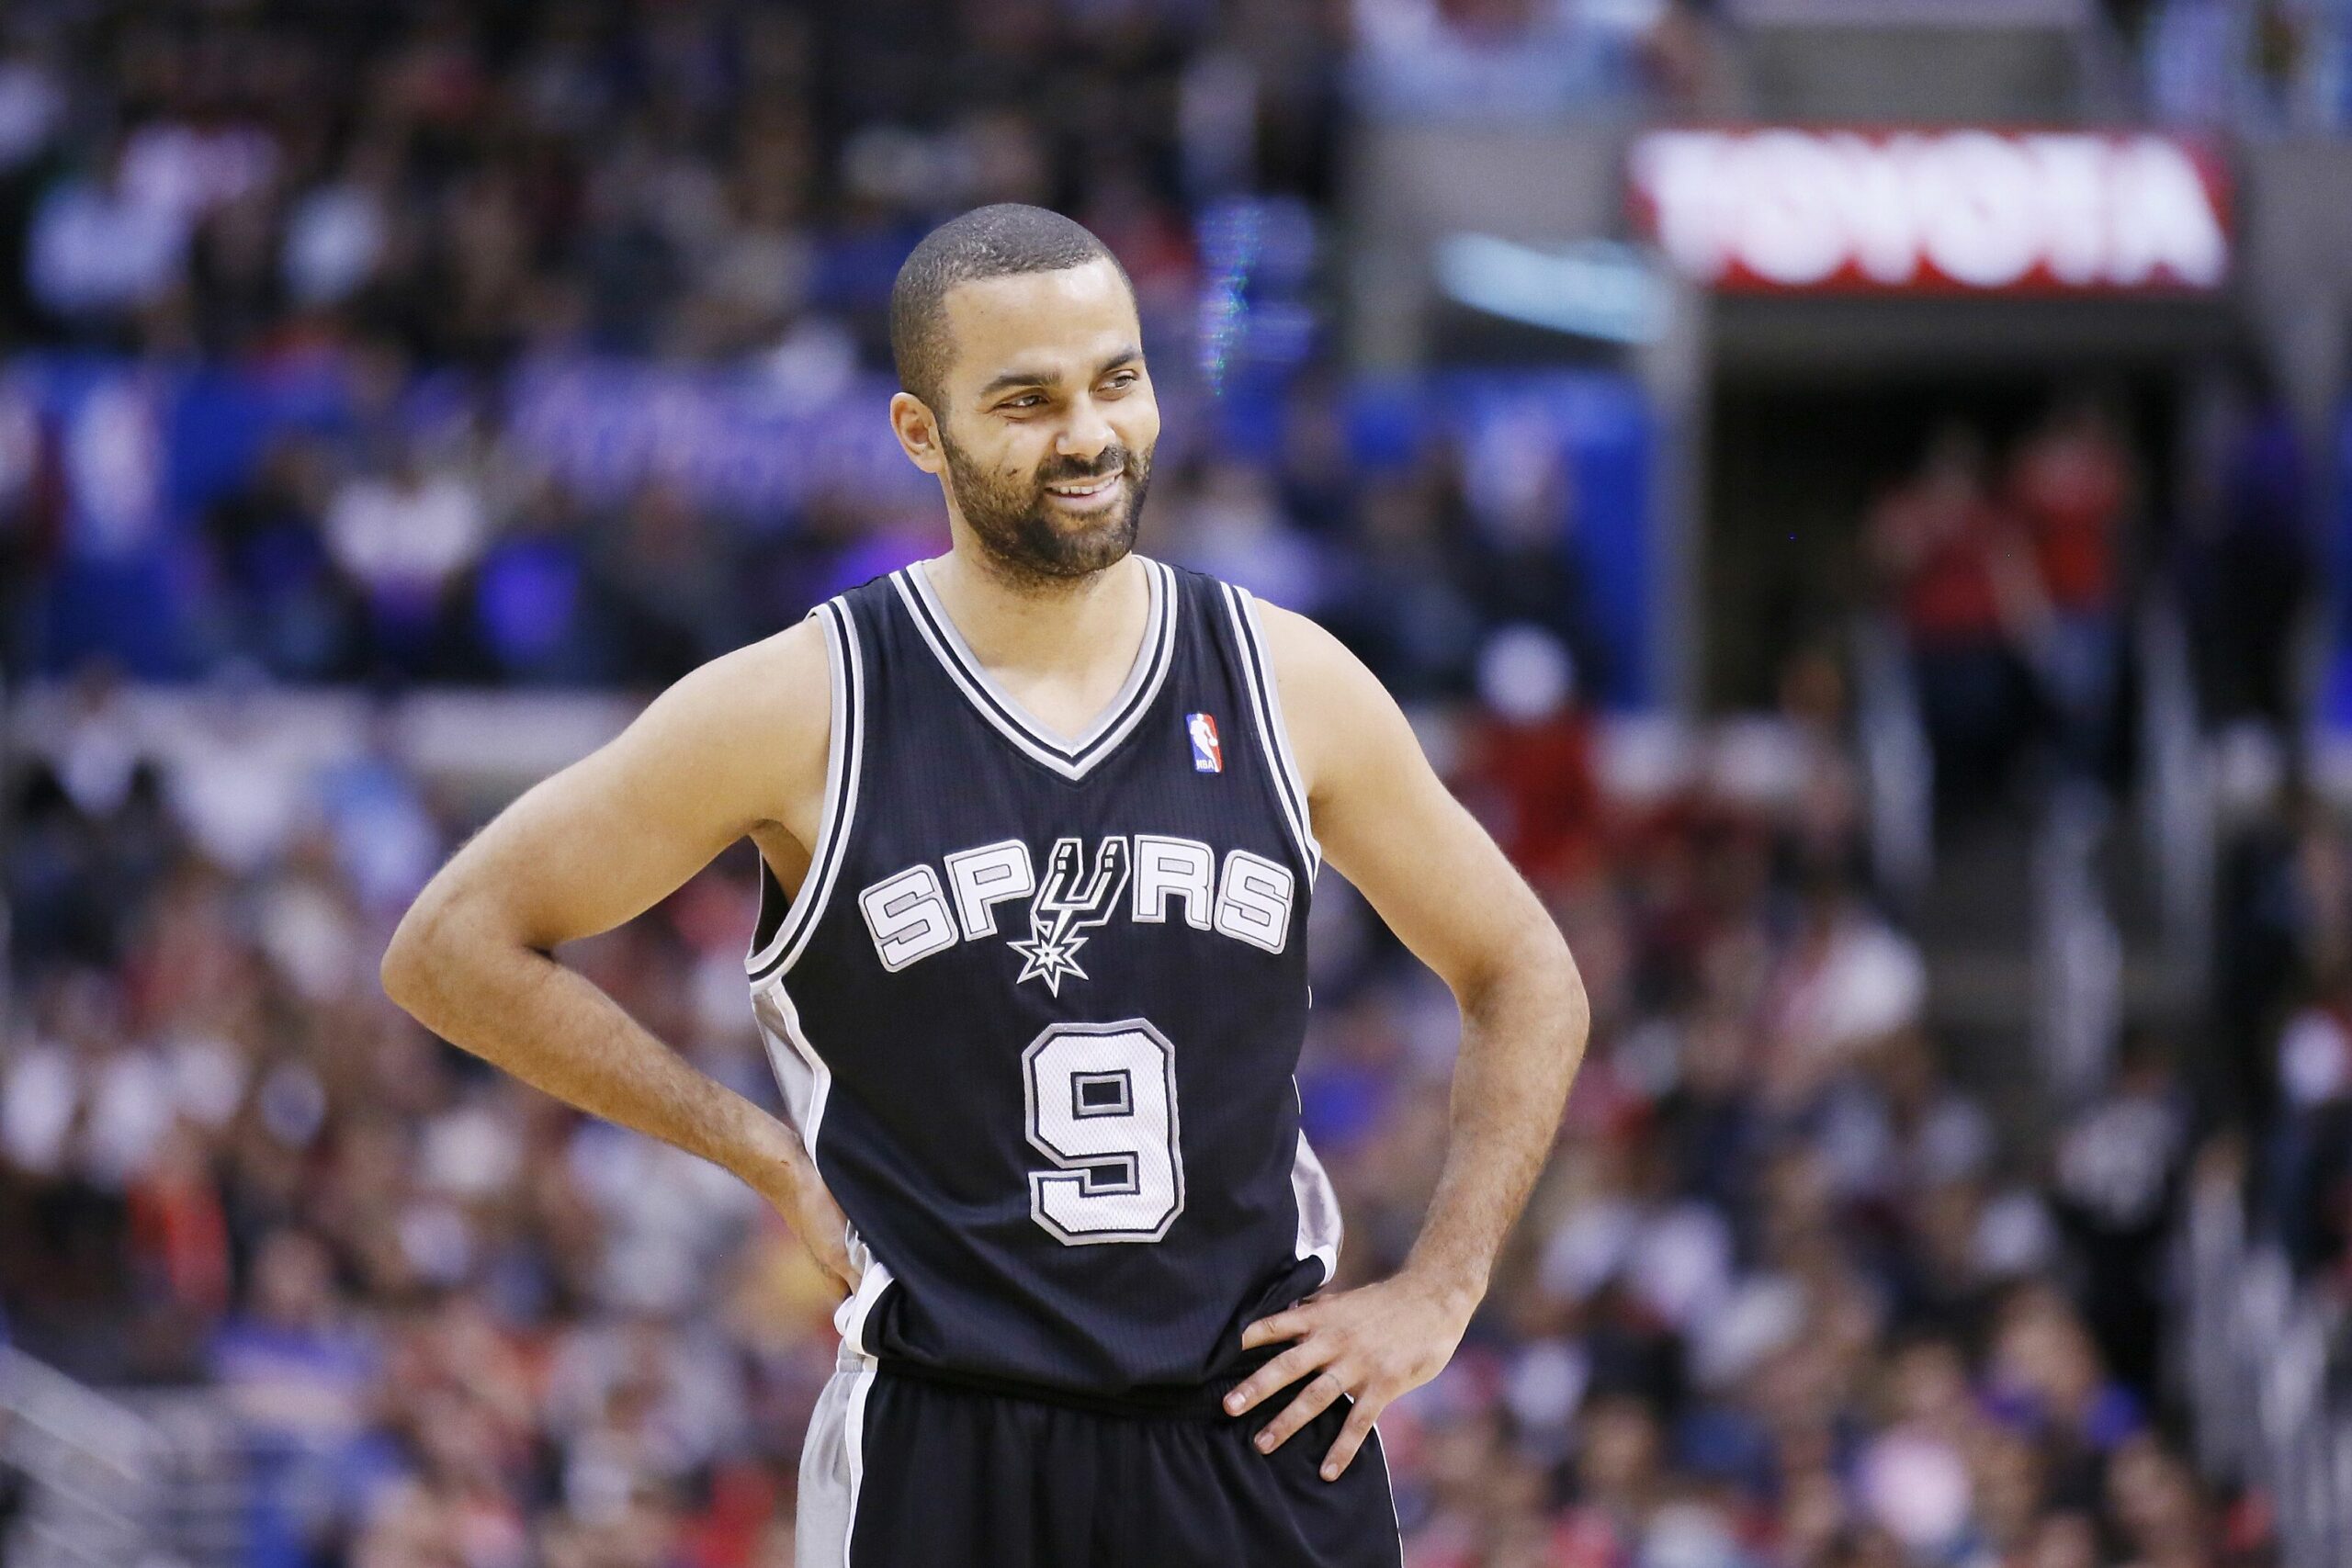 How much did Tony Parker do in his career?